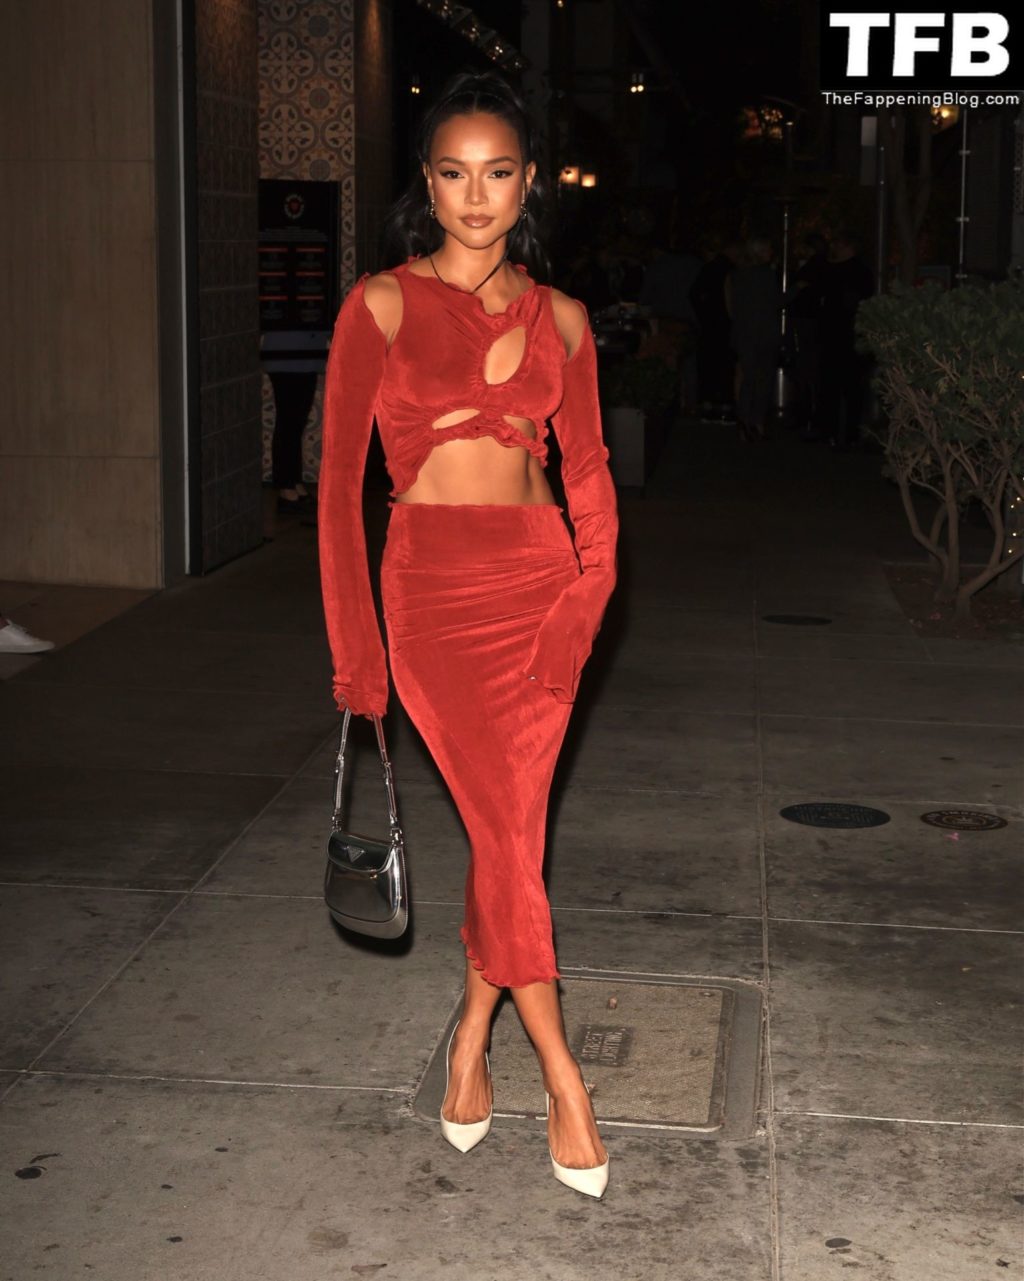 Karrueche Tran Sexy The Fappening Blog 20 1 1024x1281 - Karrueche Tran Shows Her Pokies in a Red Dress at The Hollywood Reporter’s Oscar Nominees Night (68 Photos)